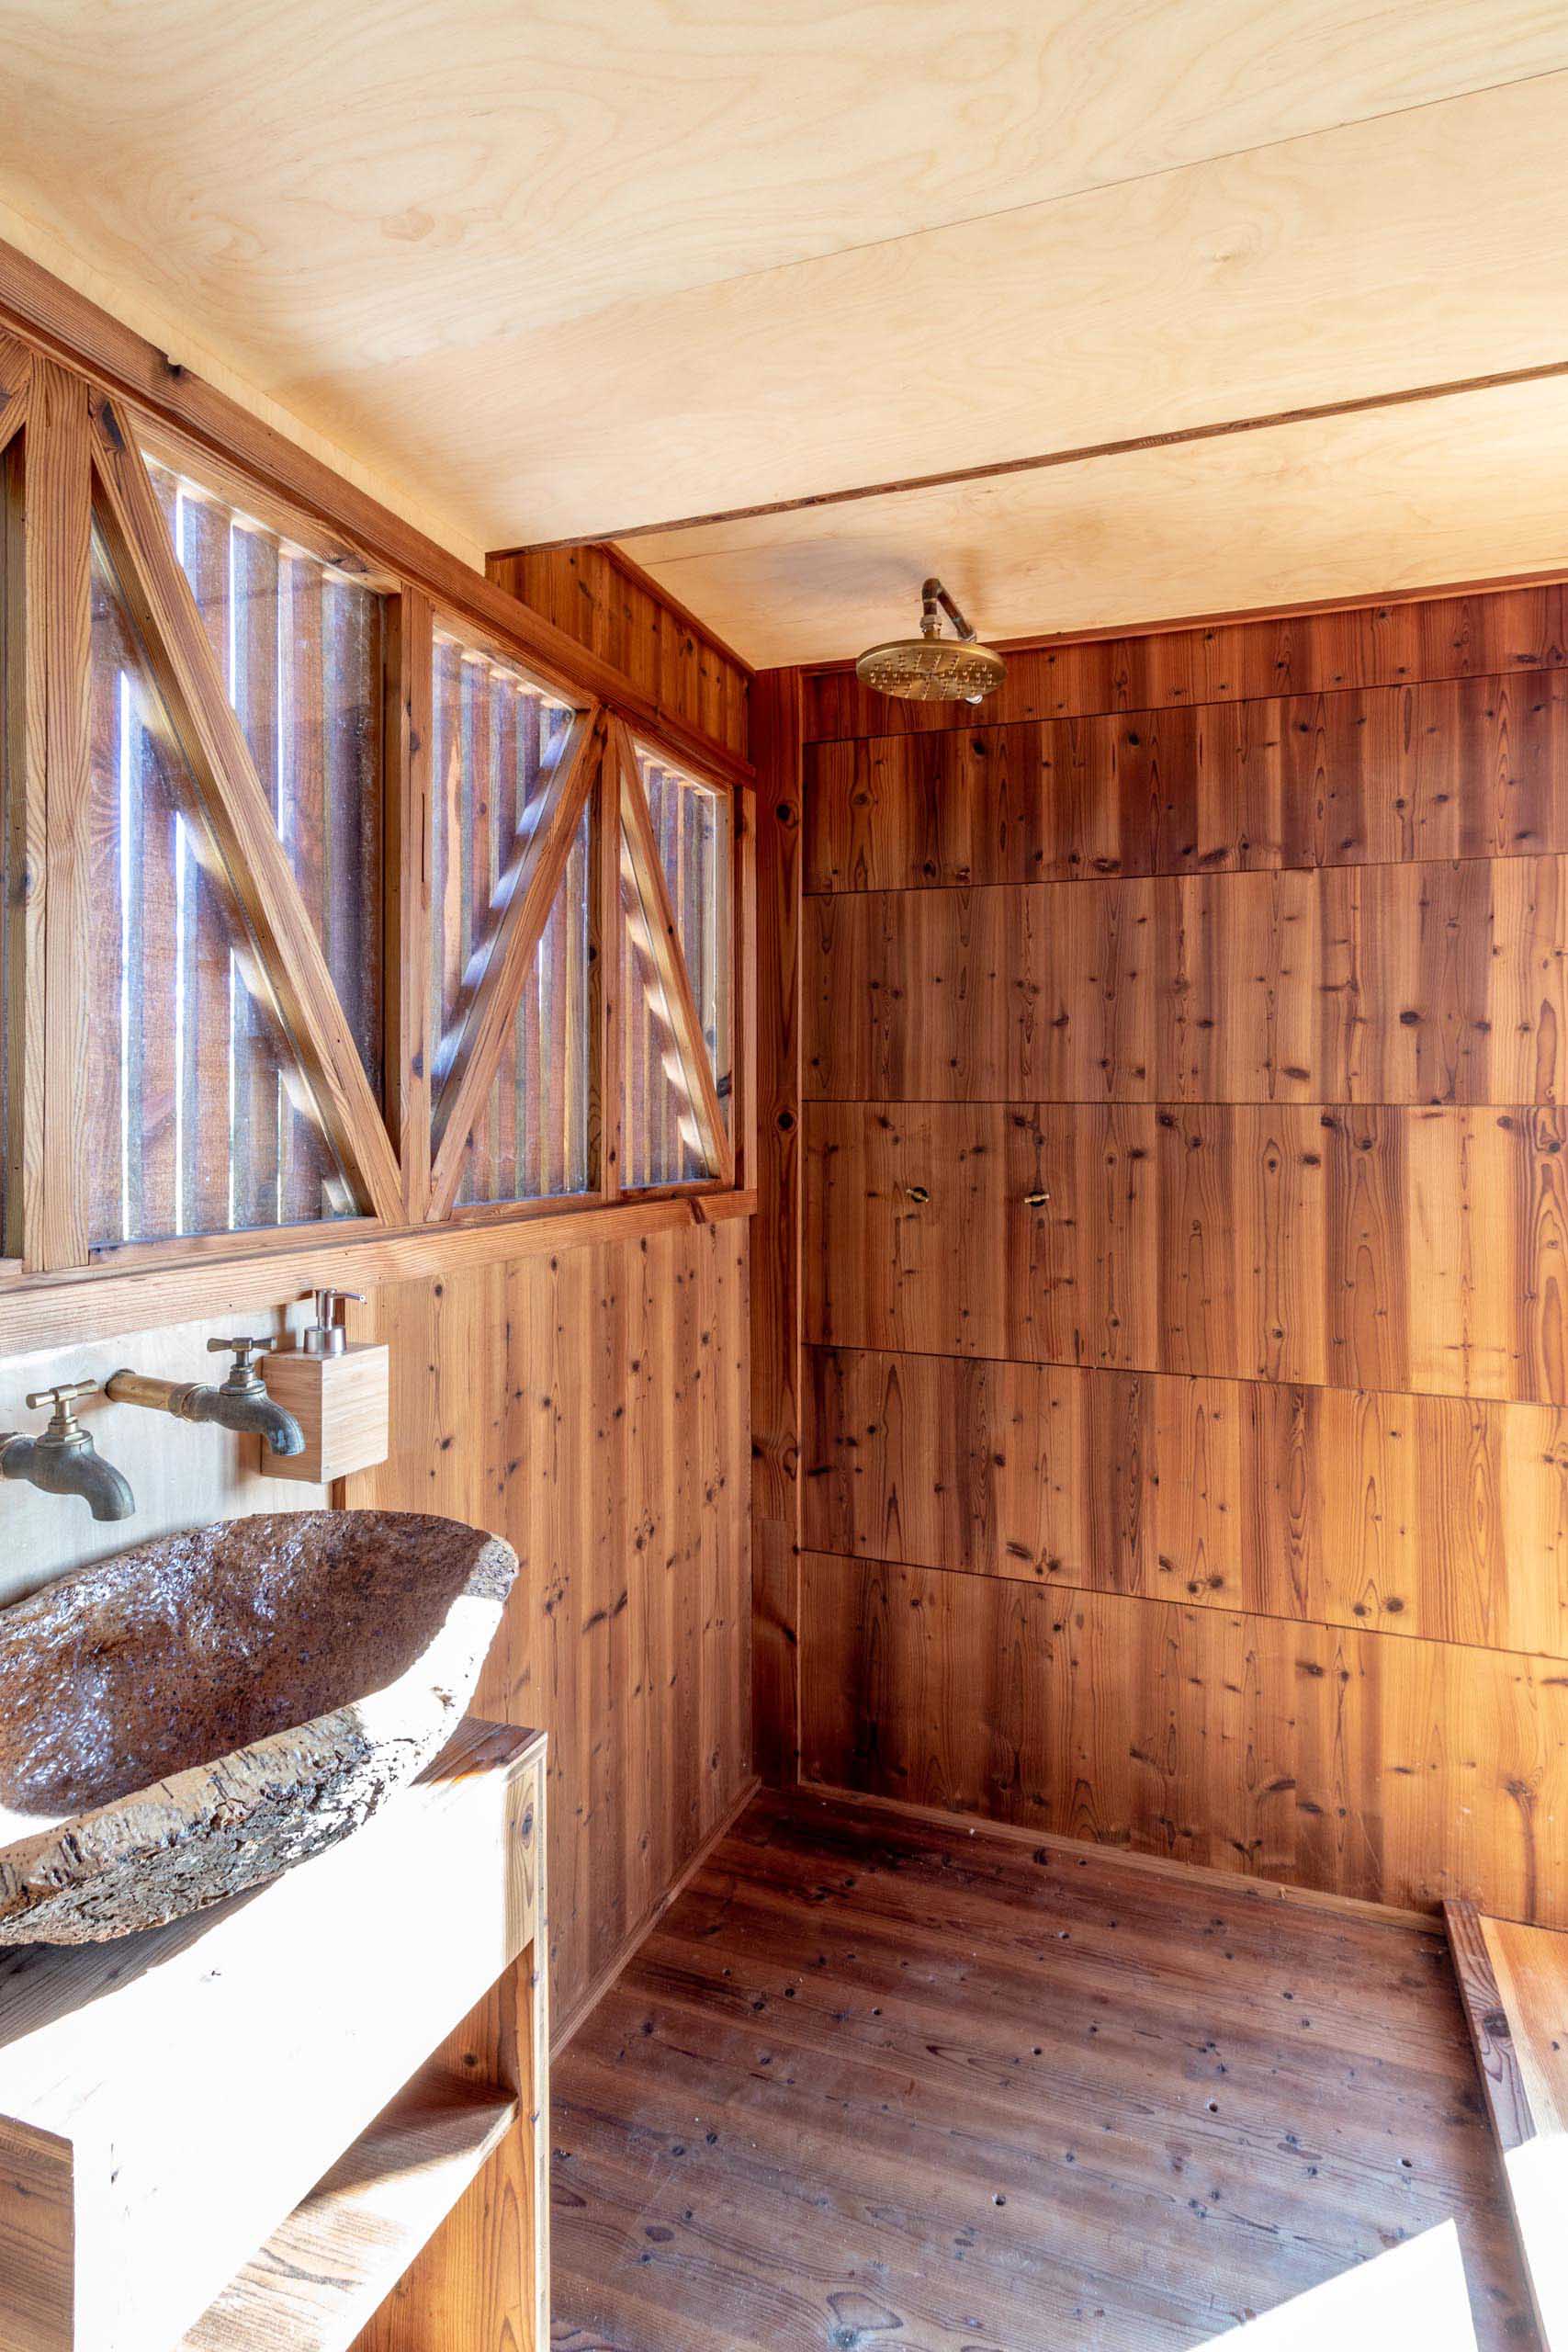 This wood-lined tiny house bathroom is located underneath the sleeping loft, and includes windows, a shower, and a vanity area.